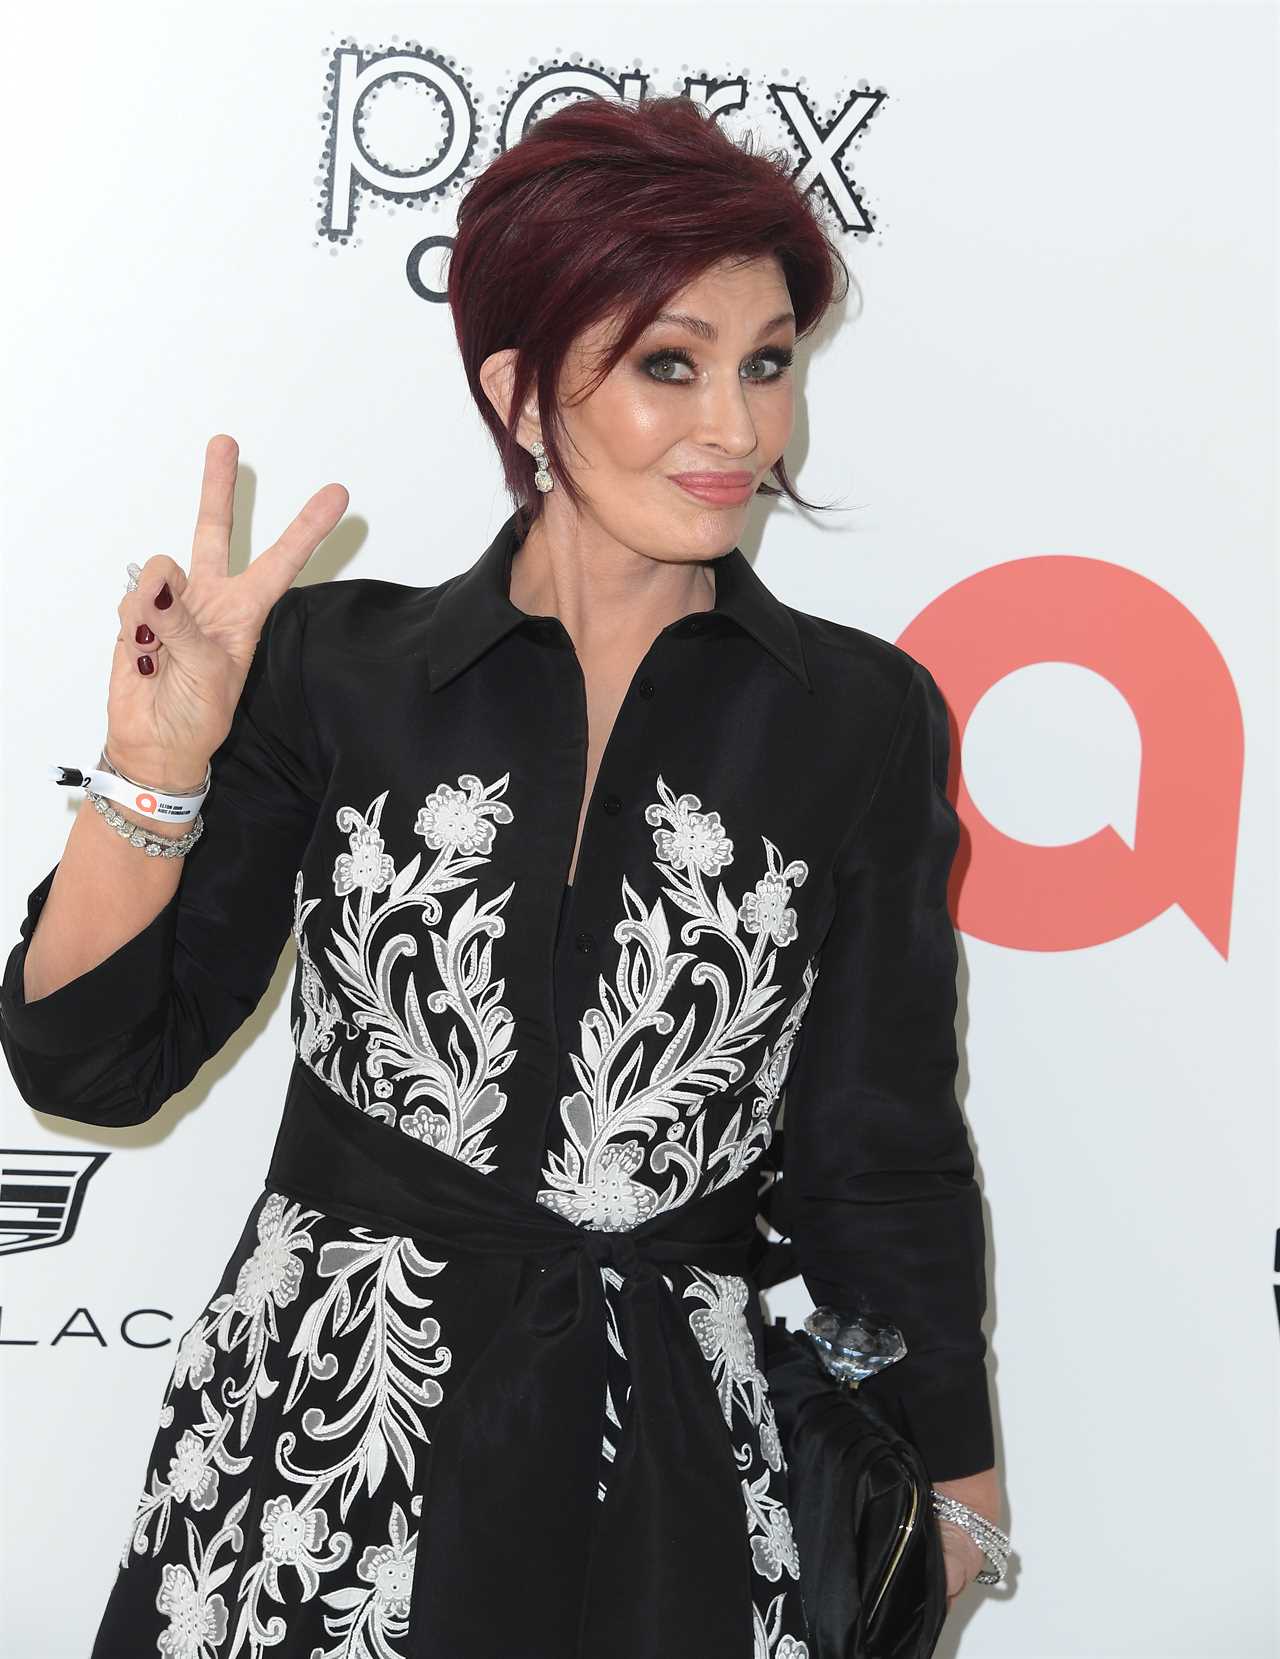 Sharon Osbourne to be Paid £100,000 a Day for Celebrity Big Brother Appearance